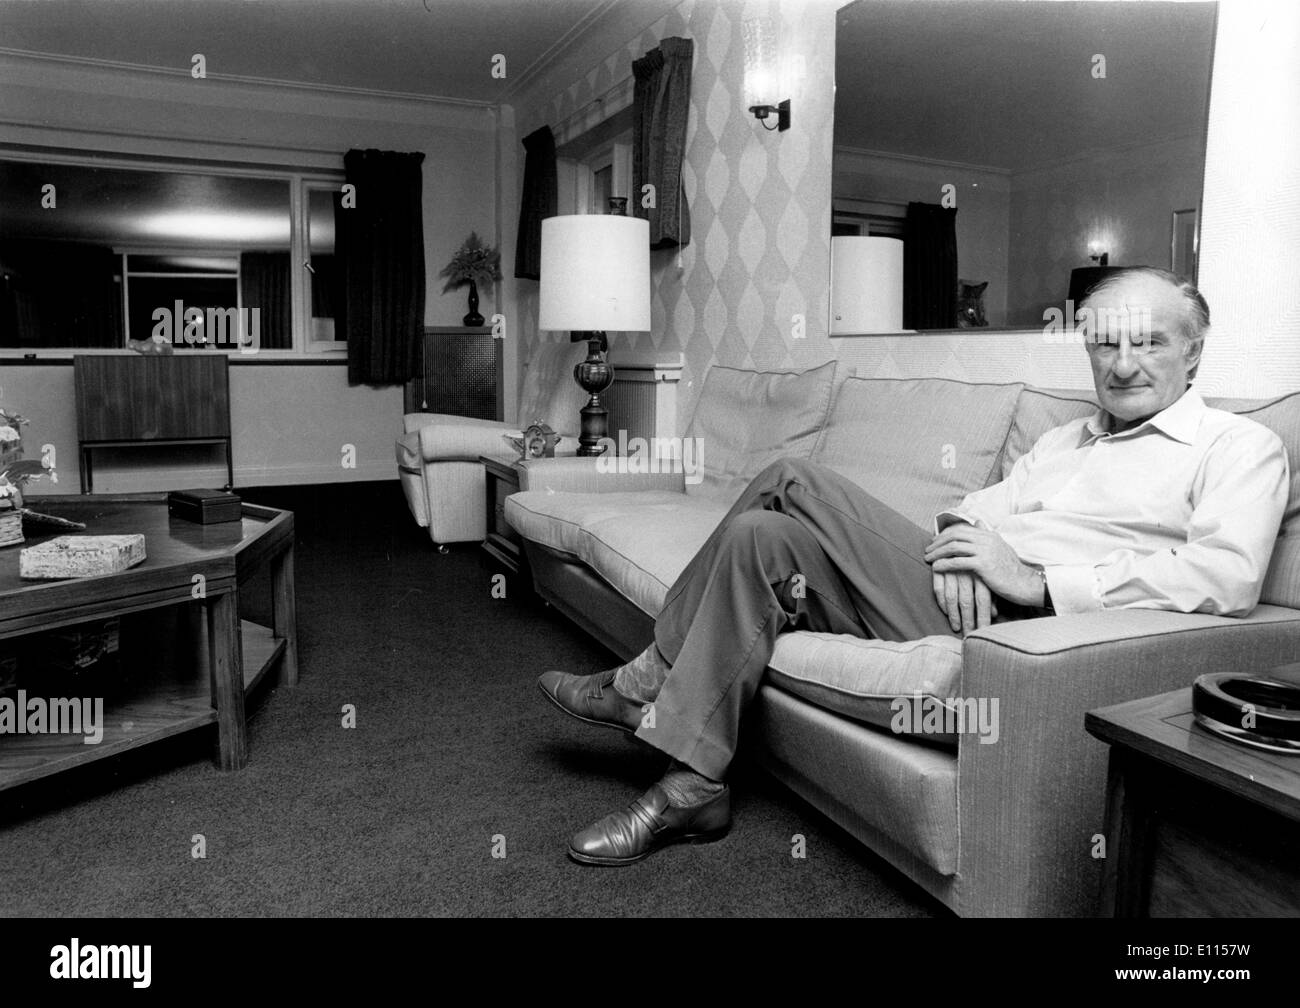 Aug 15, 1975; Essex, UK; The Governement yesterday ordered the inmediate dismissal of Mr. JOHN BARBER, 56, as deputy chairman and managing director of British Leyland Motor Corporation, which was nationalised on Monday. The picture shows John Barber taking it easy at his home in Upshire, Essex, last night after he had been dismissed as British Leyland's 42,000 a year deputy chairman and managing director. Stock Photo